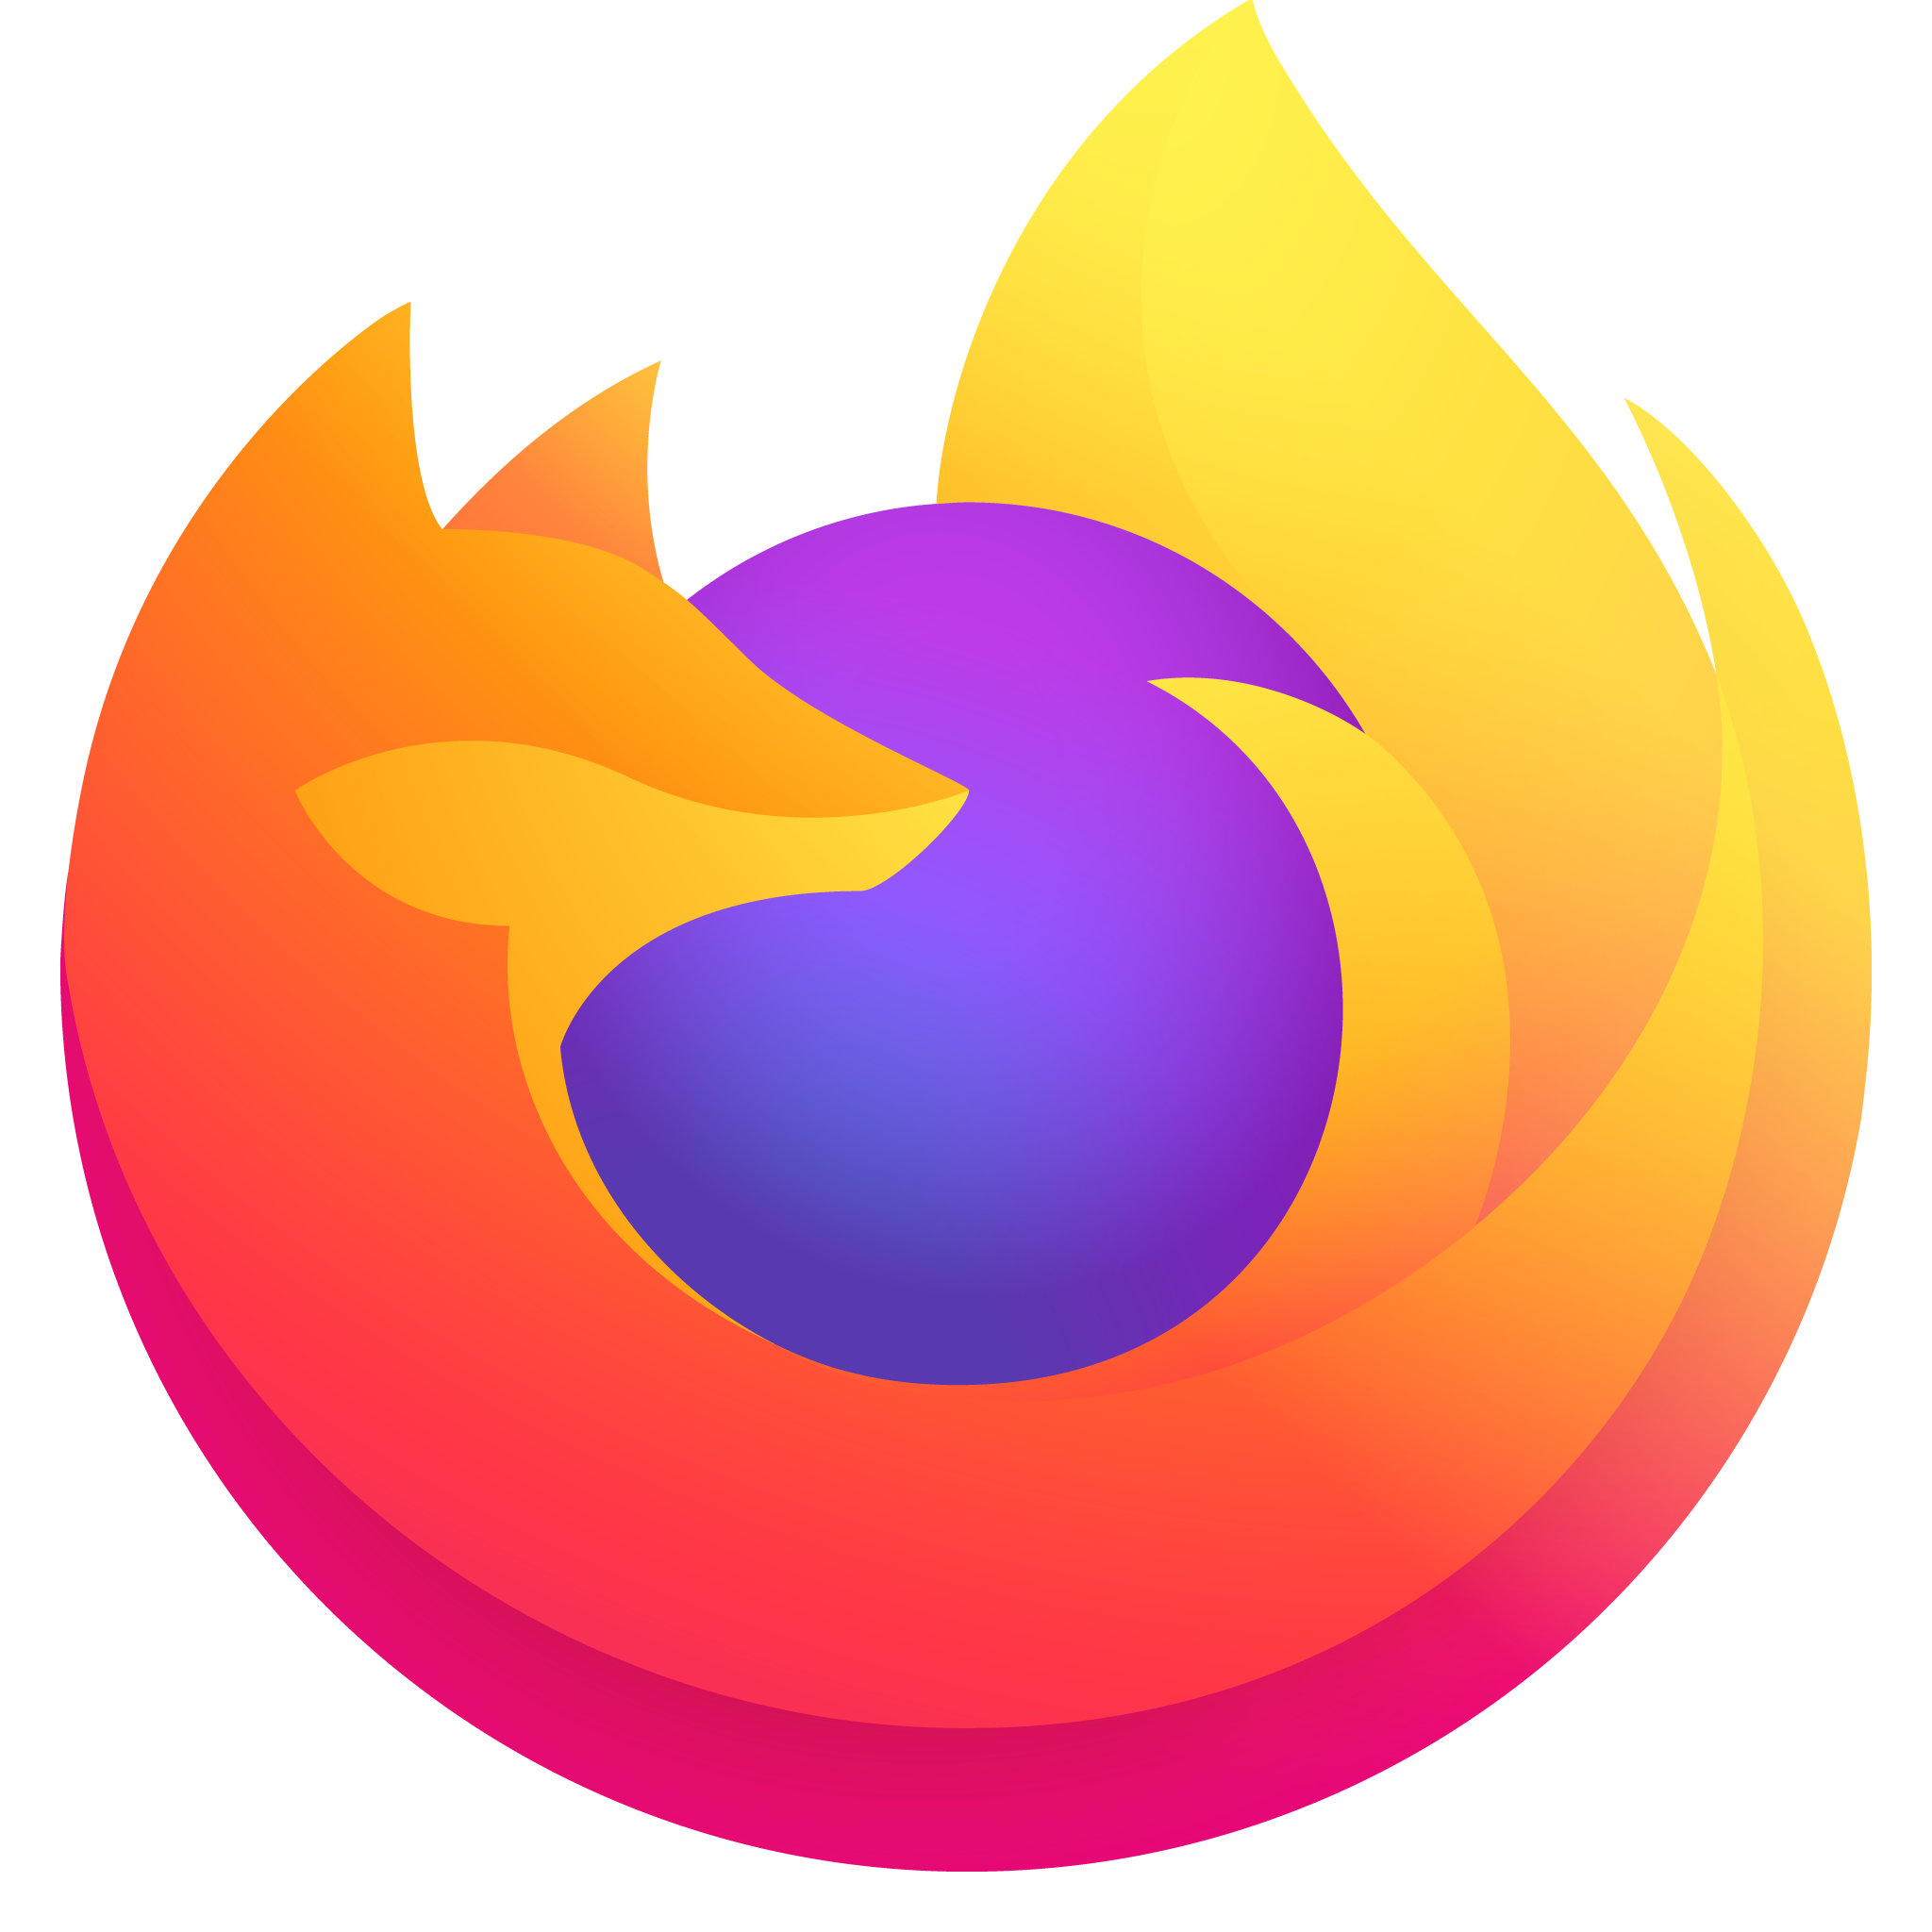 Manifest v3 extensions are now accepted on the Firefox add-on store